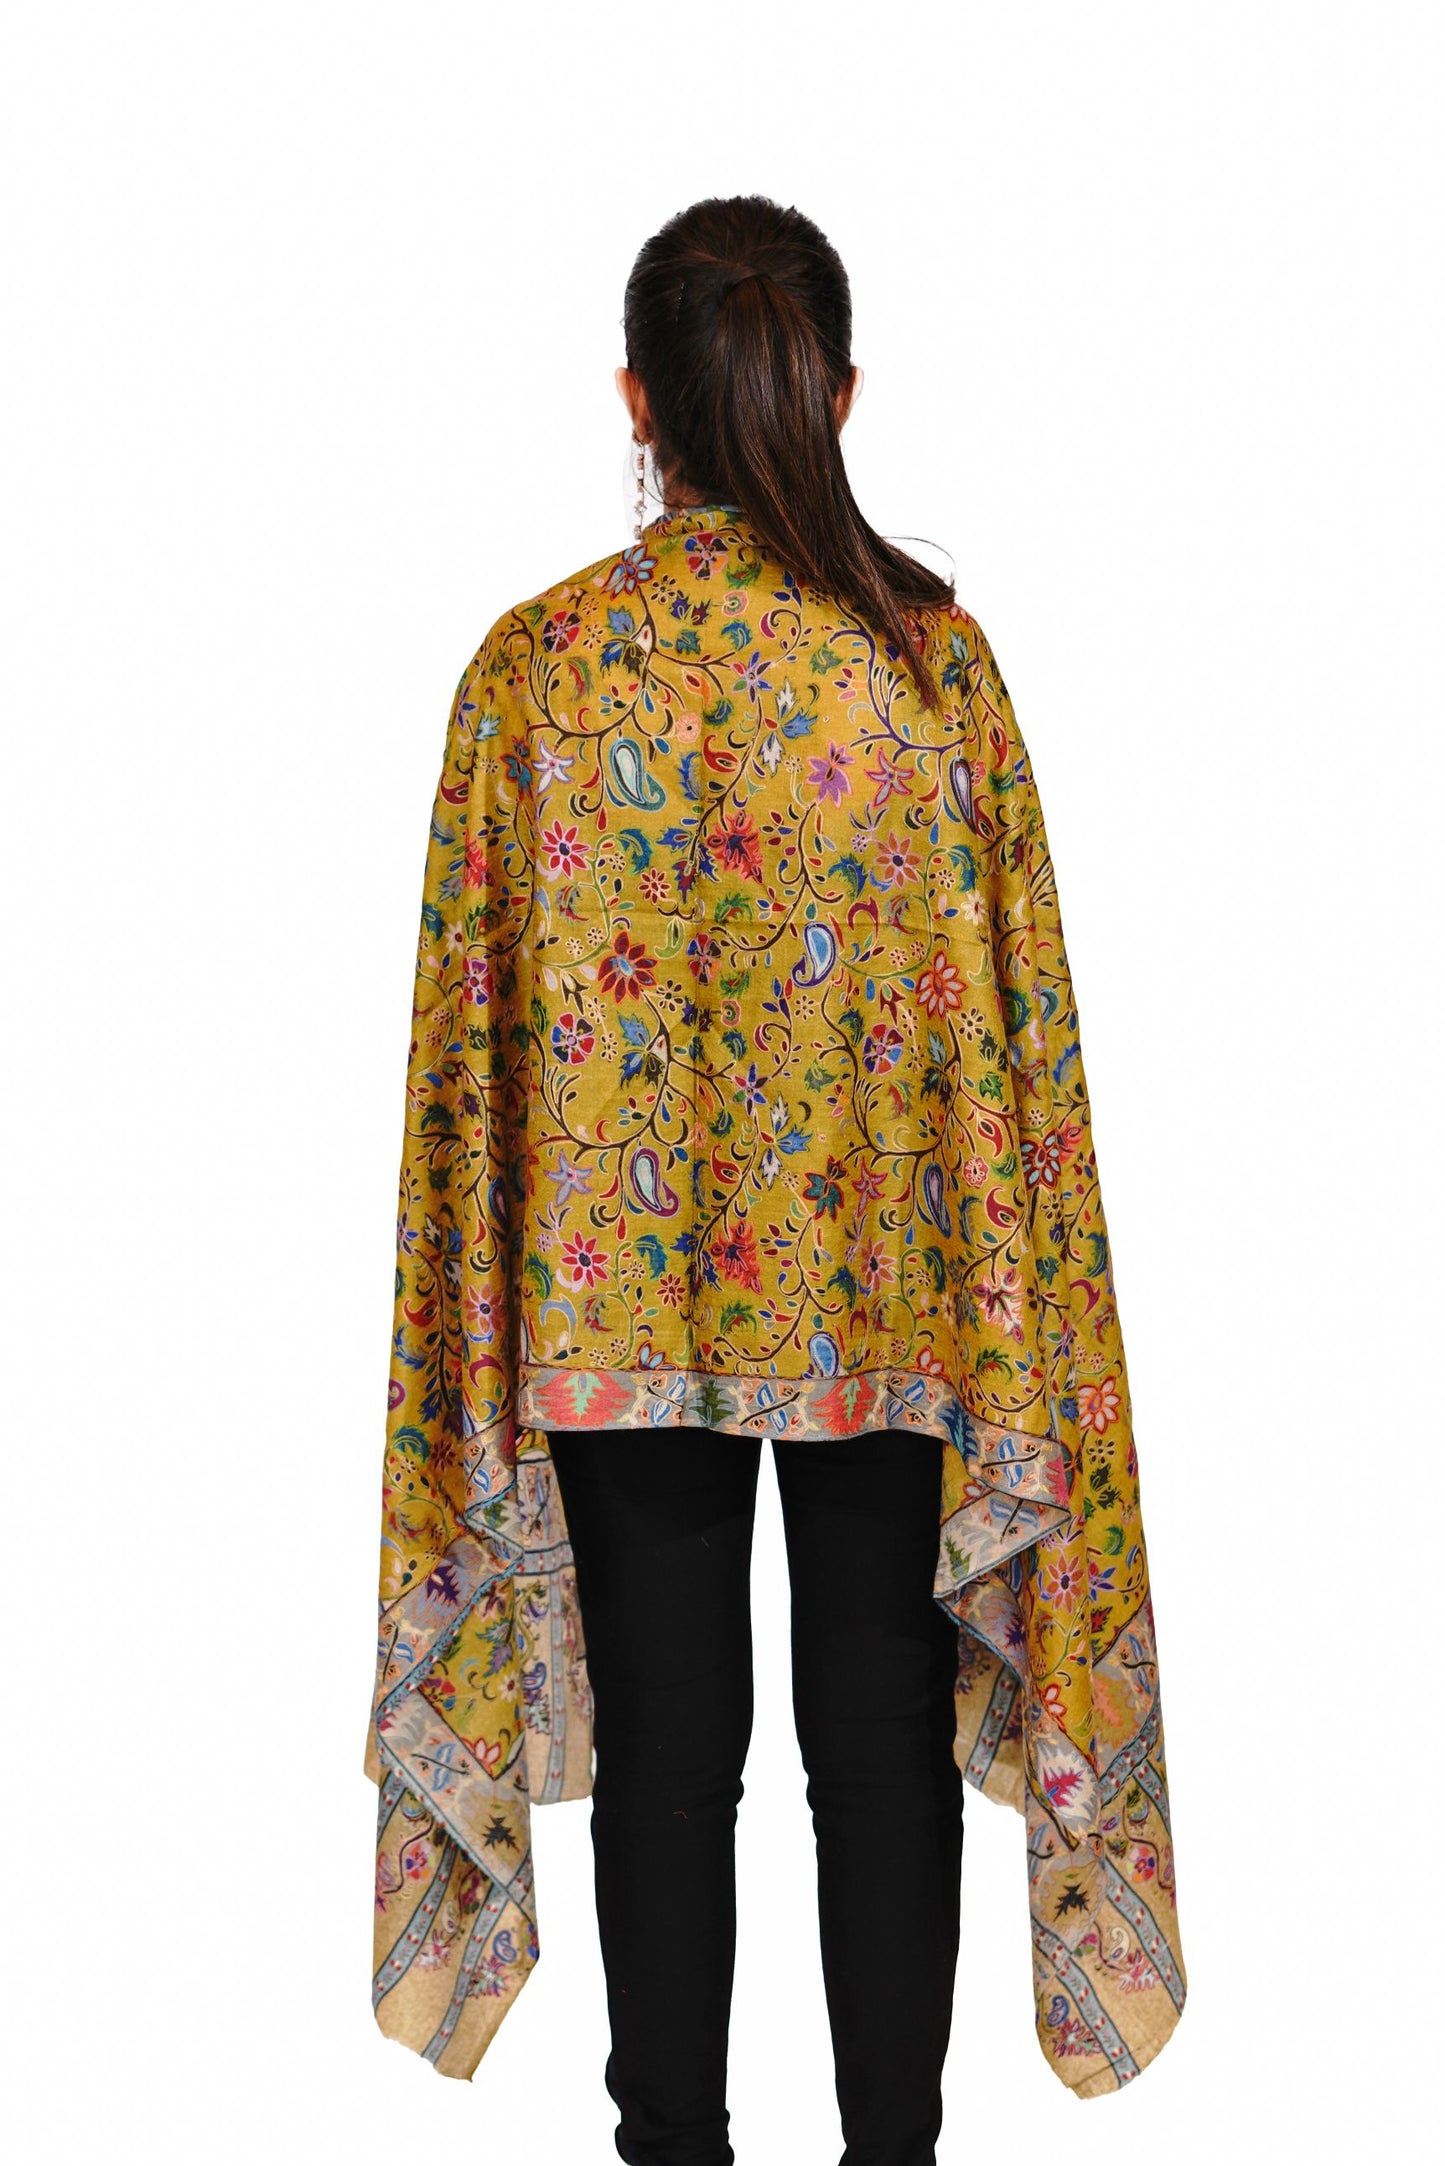 Heritage Hand Embroidered Printed Stole for Women - Mellow Yellow